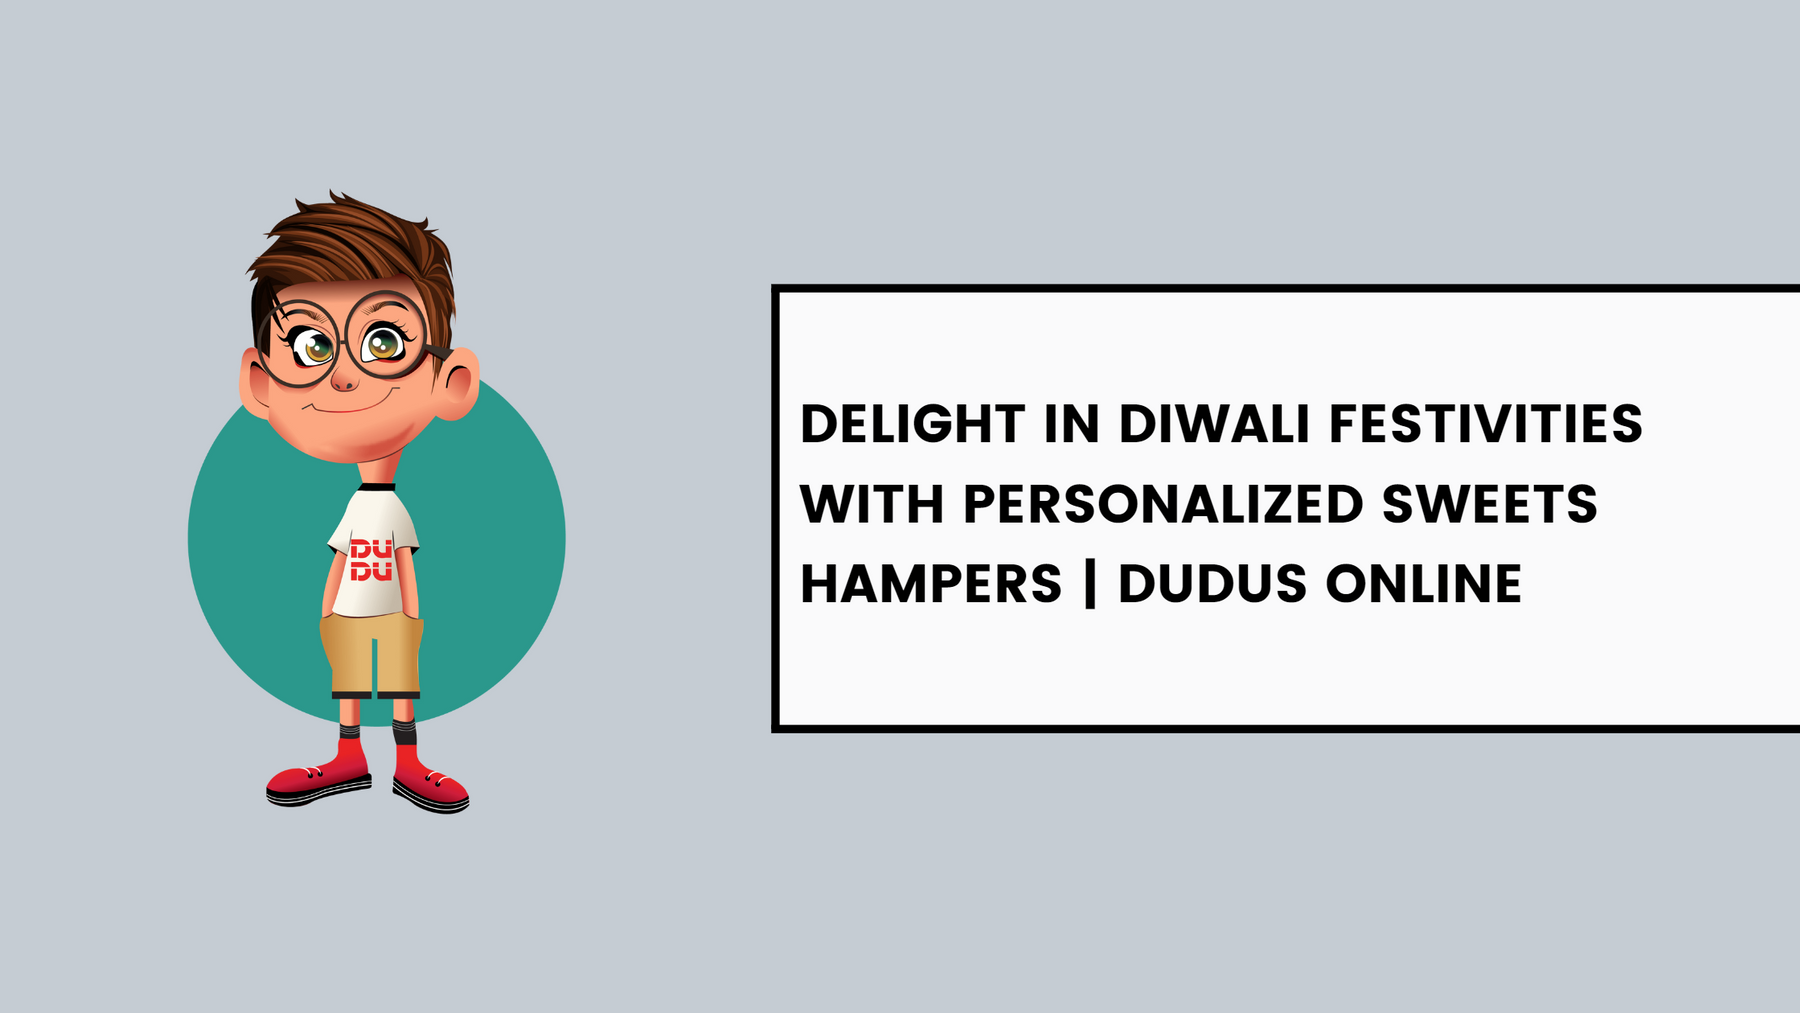 Delight in Diwali Festivities with Personalized Sweets Hampers | Dudus Online